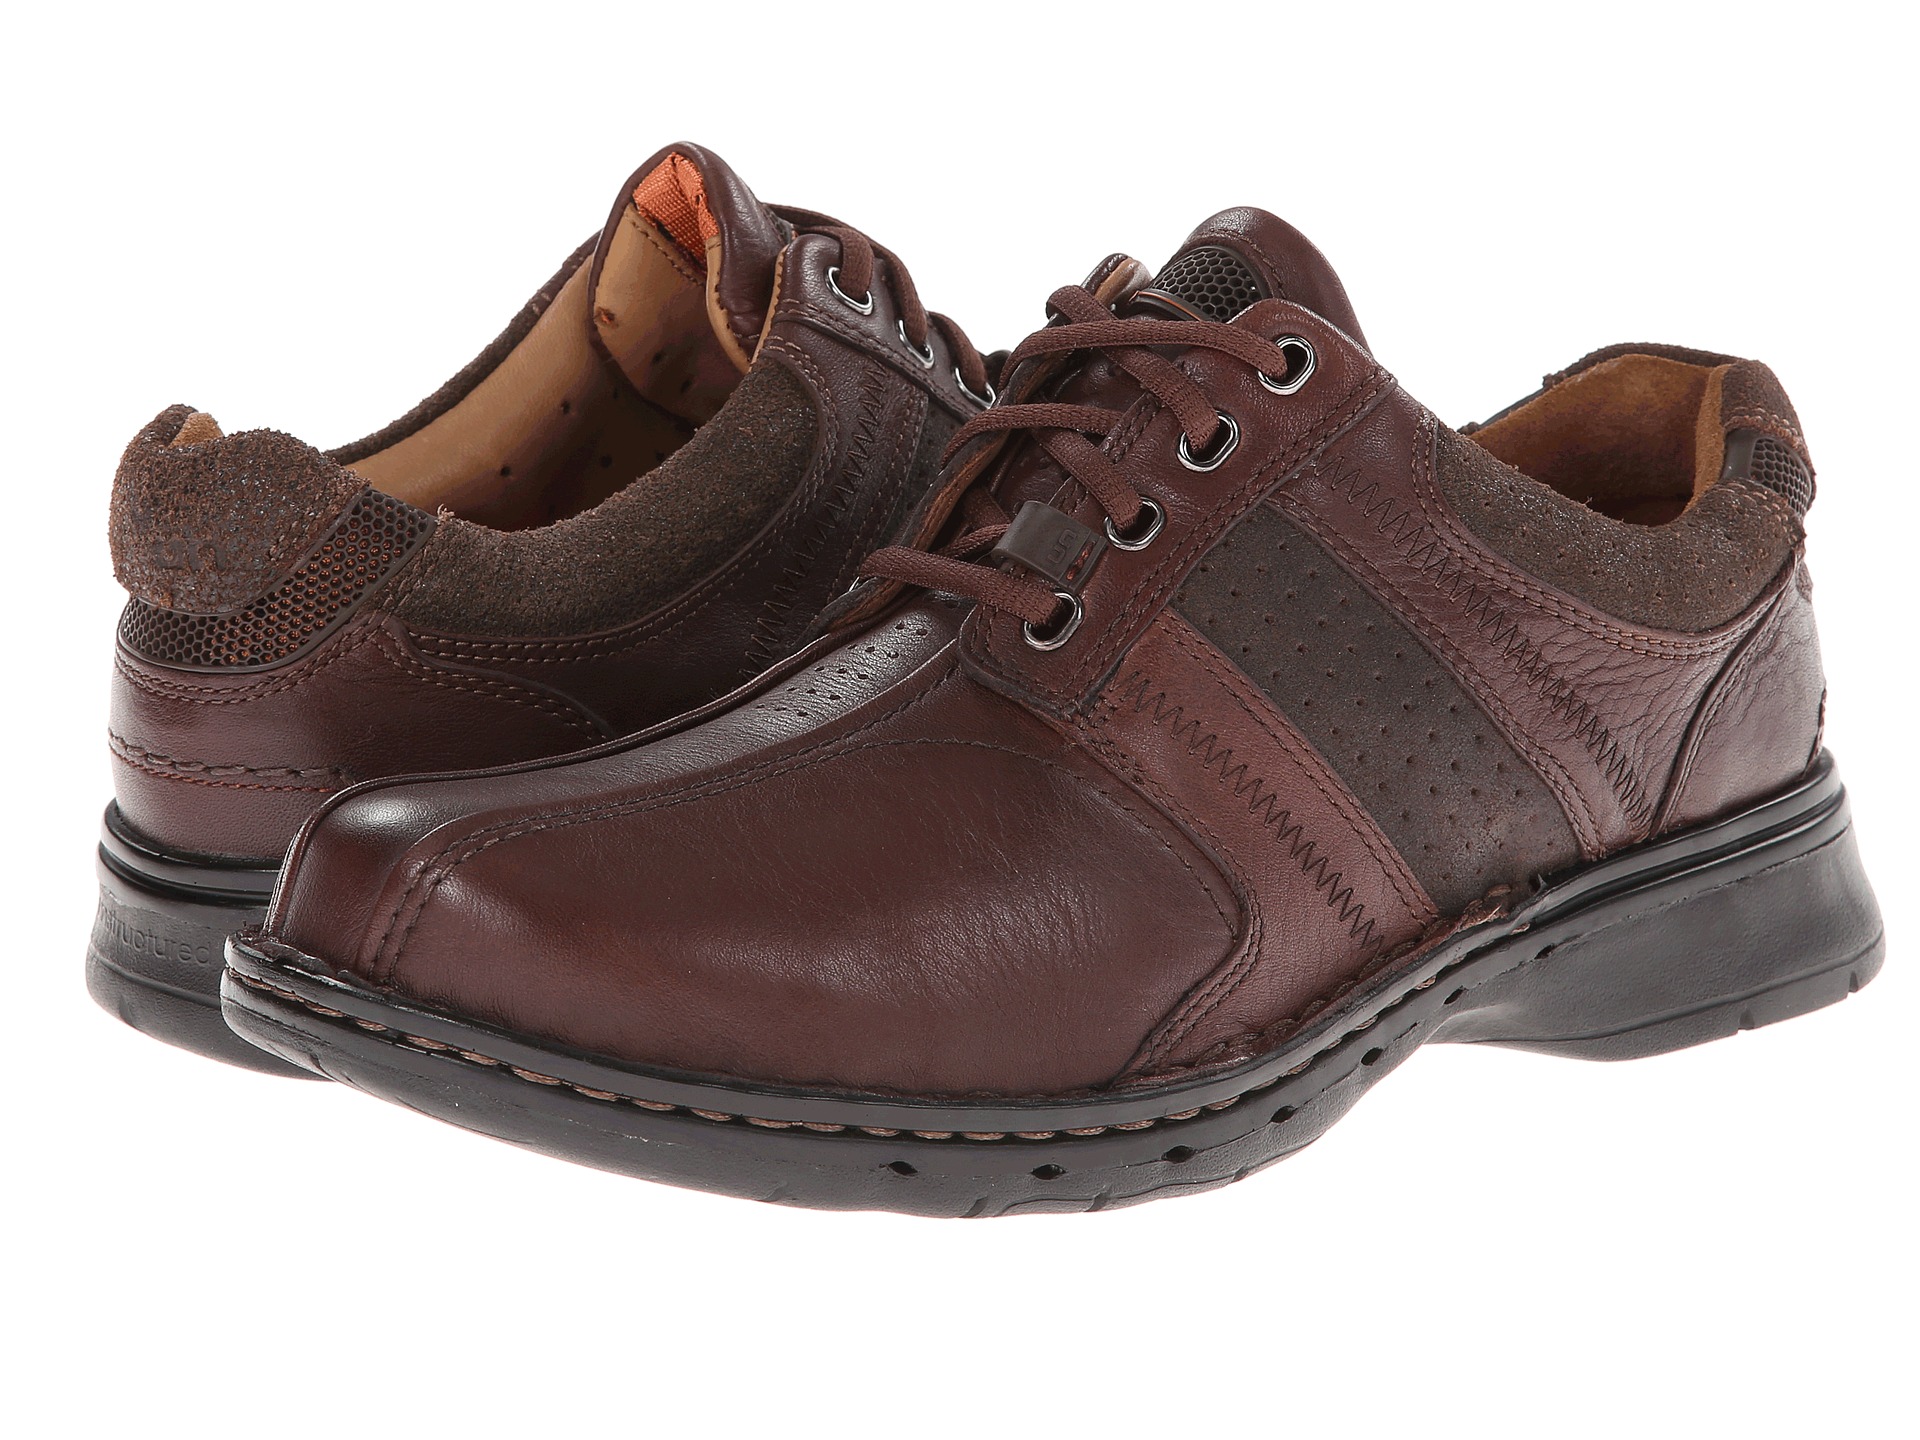 Clarks Un.coil Brown Leather - Zappos.com Free Shipping BOTH Ways